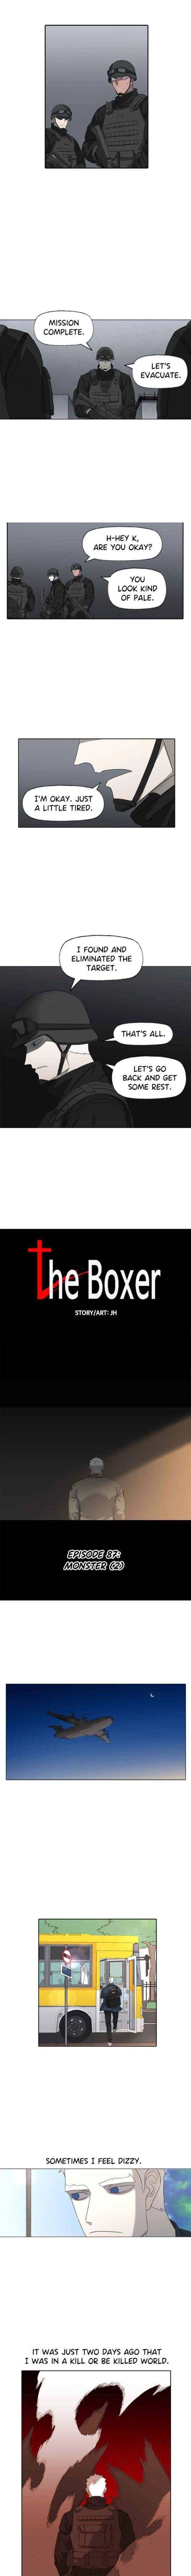 the_boxer_90_1